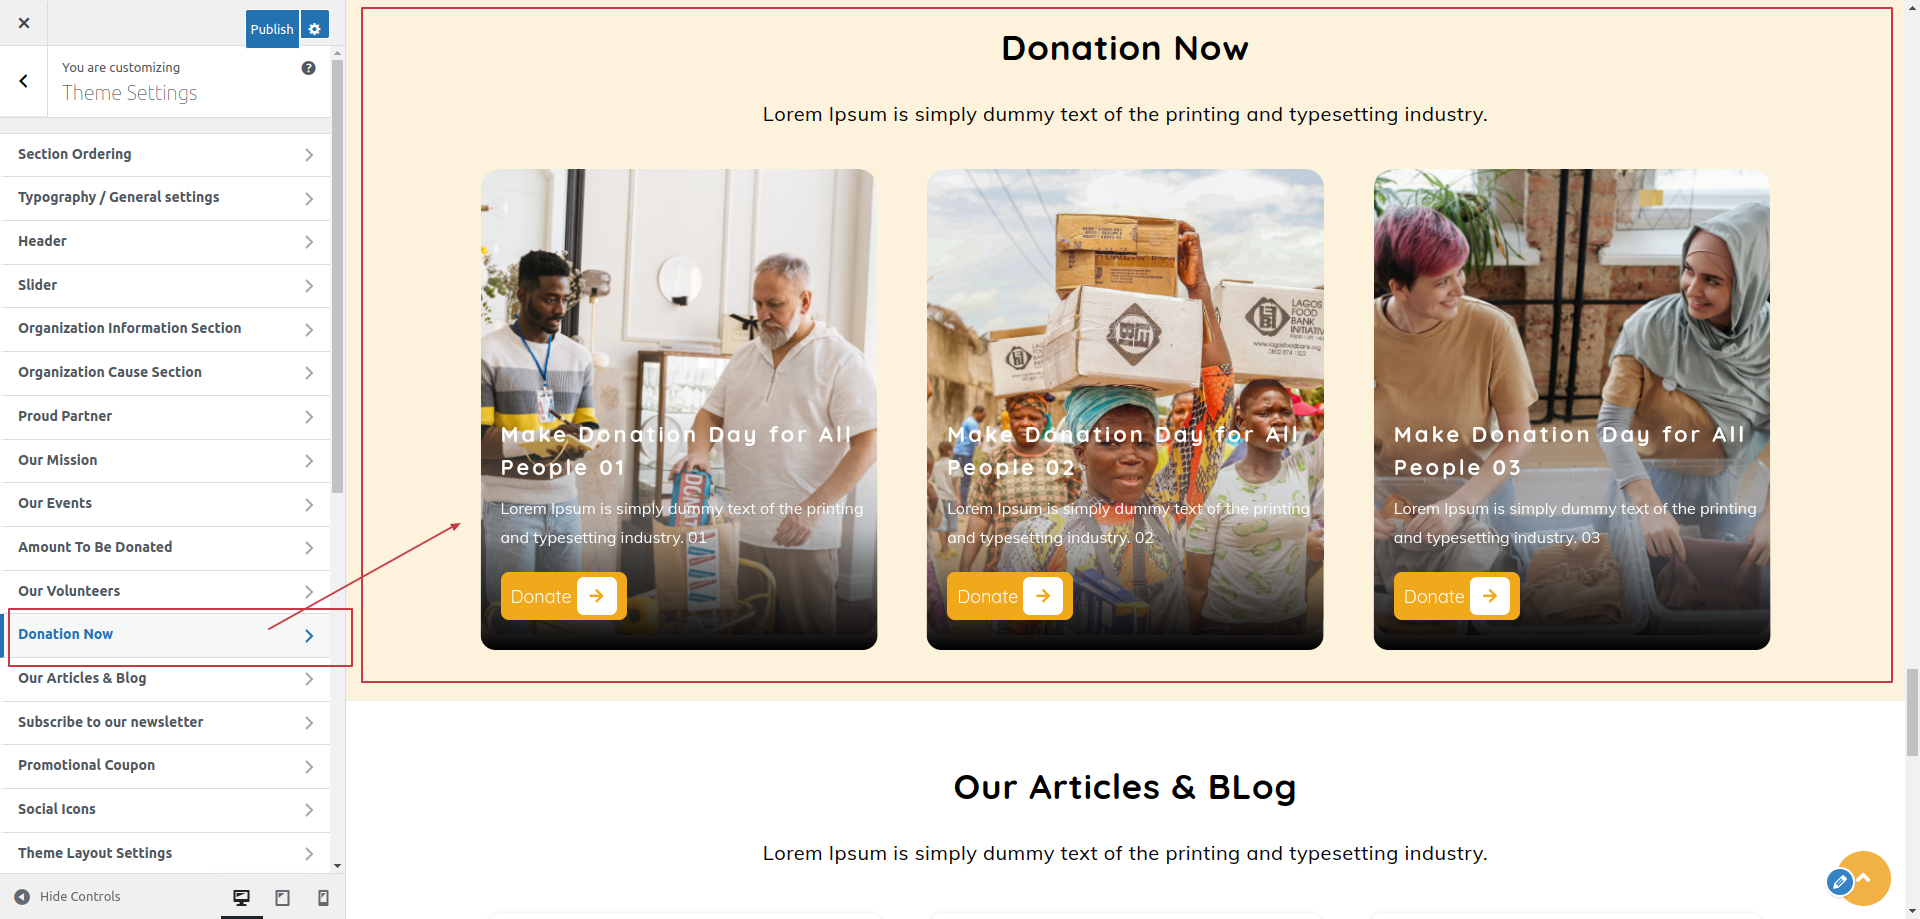 Donation Now Section